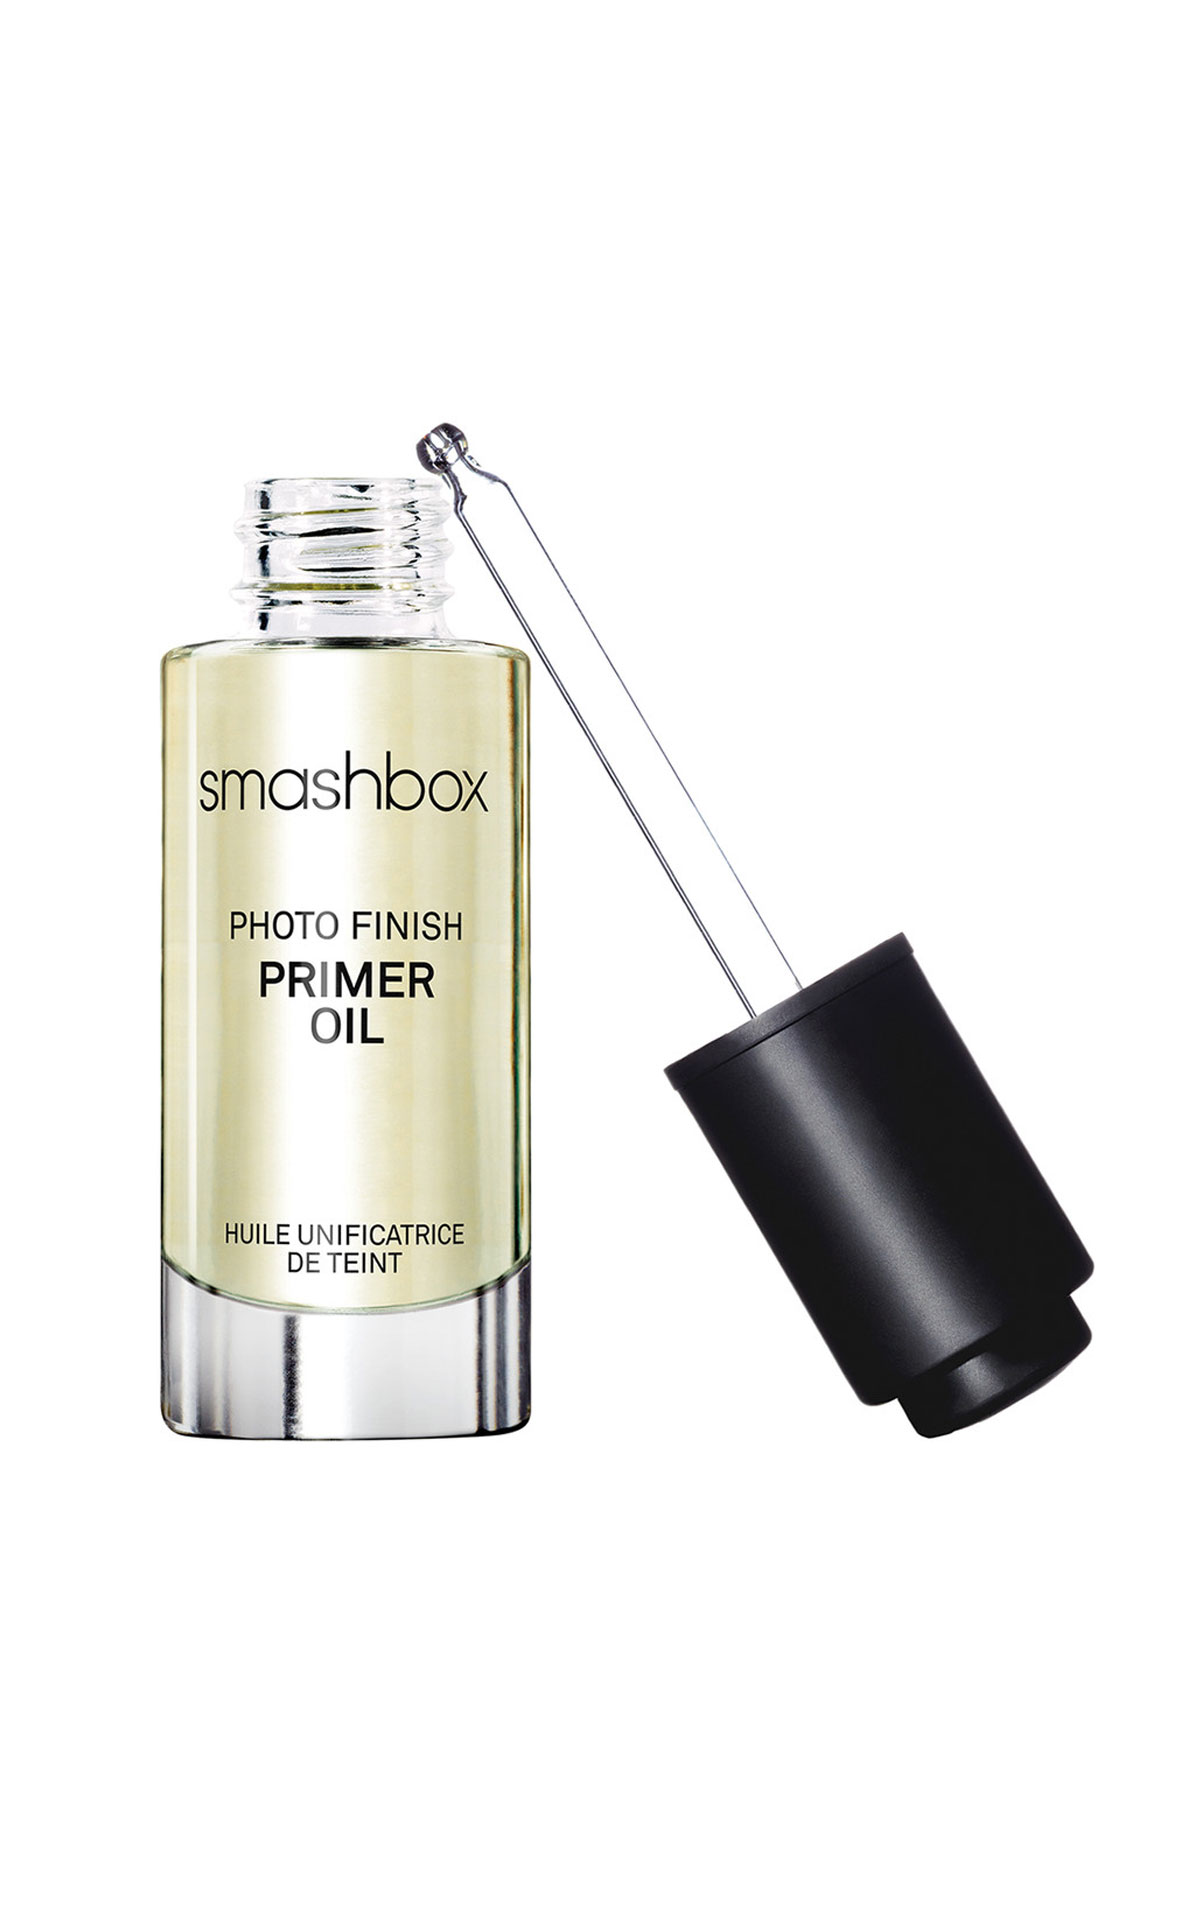 The Cosmetics Company Store Smashbox, Photo finish pimer oil from Bicester Village